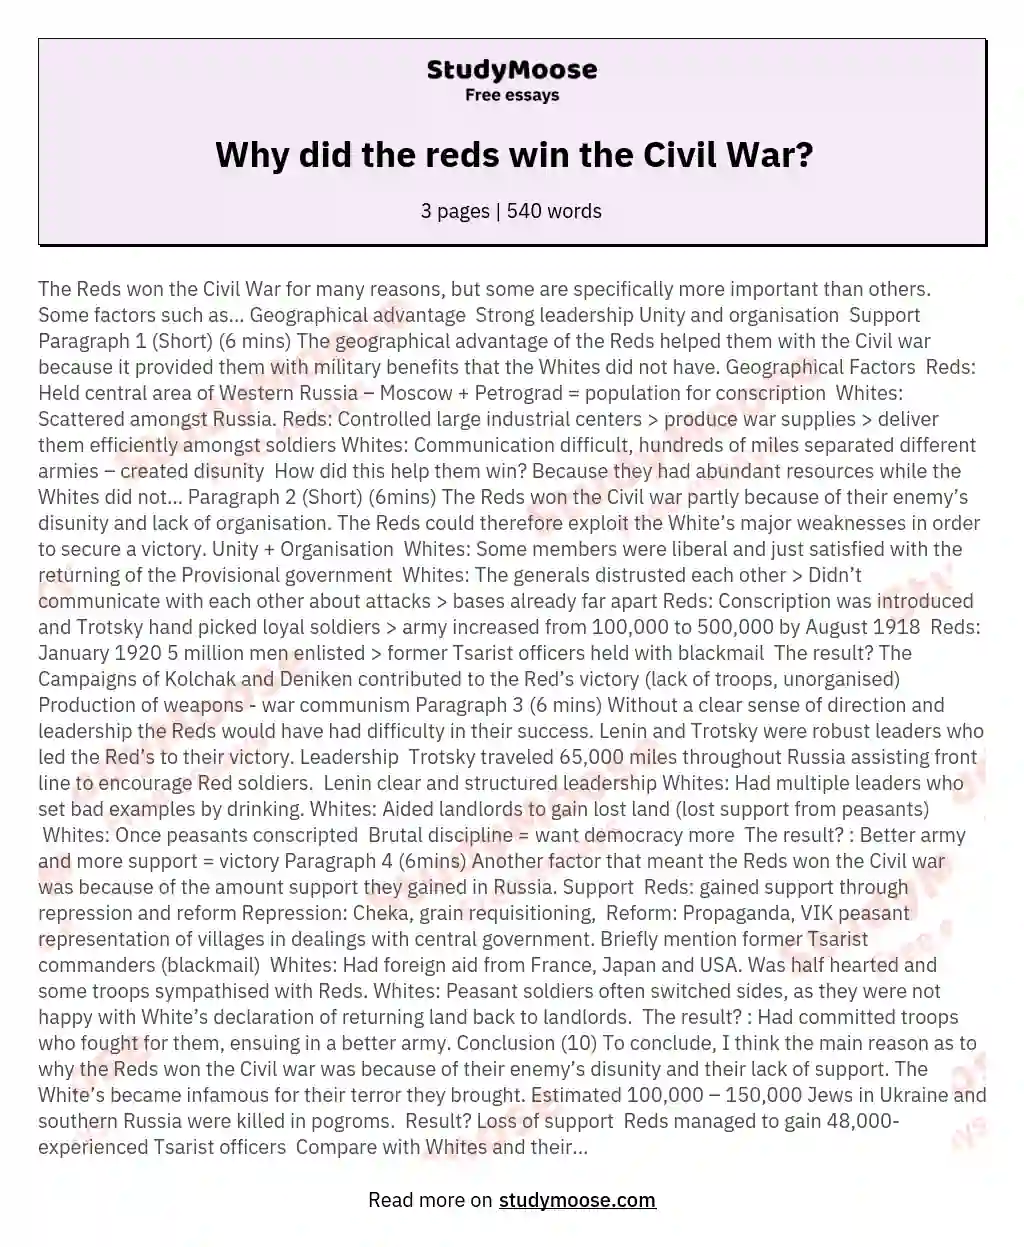 Why did the reds win the Civil War?